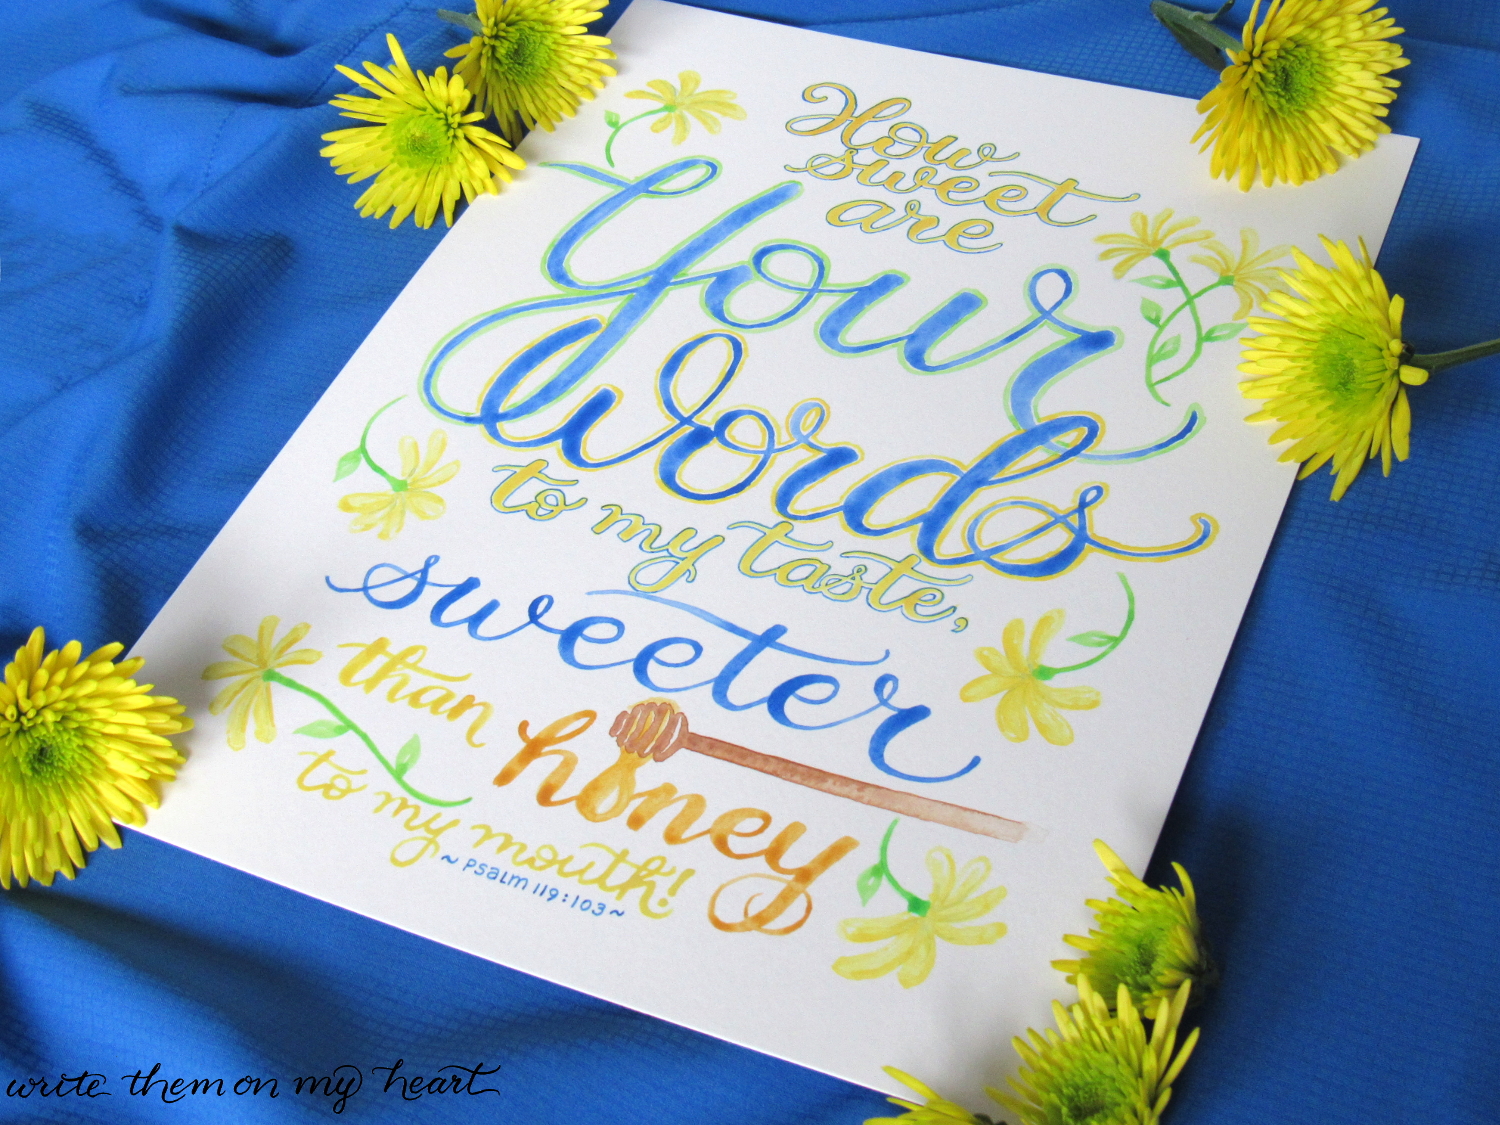 Psalm 119:103 Scripture Art to inspire EVERYdayness in God's Word